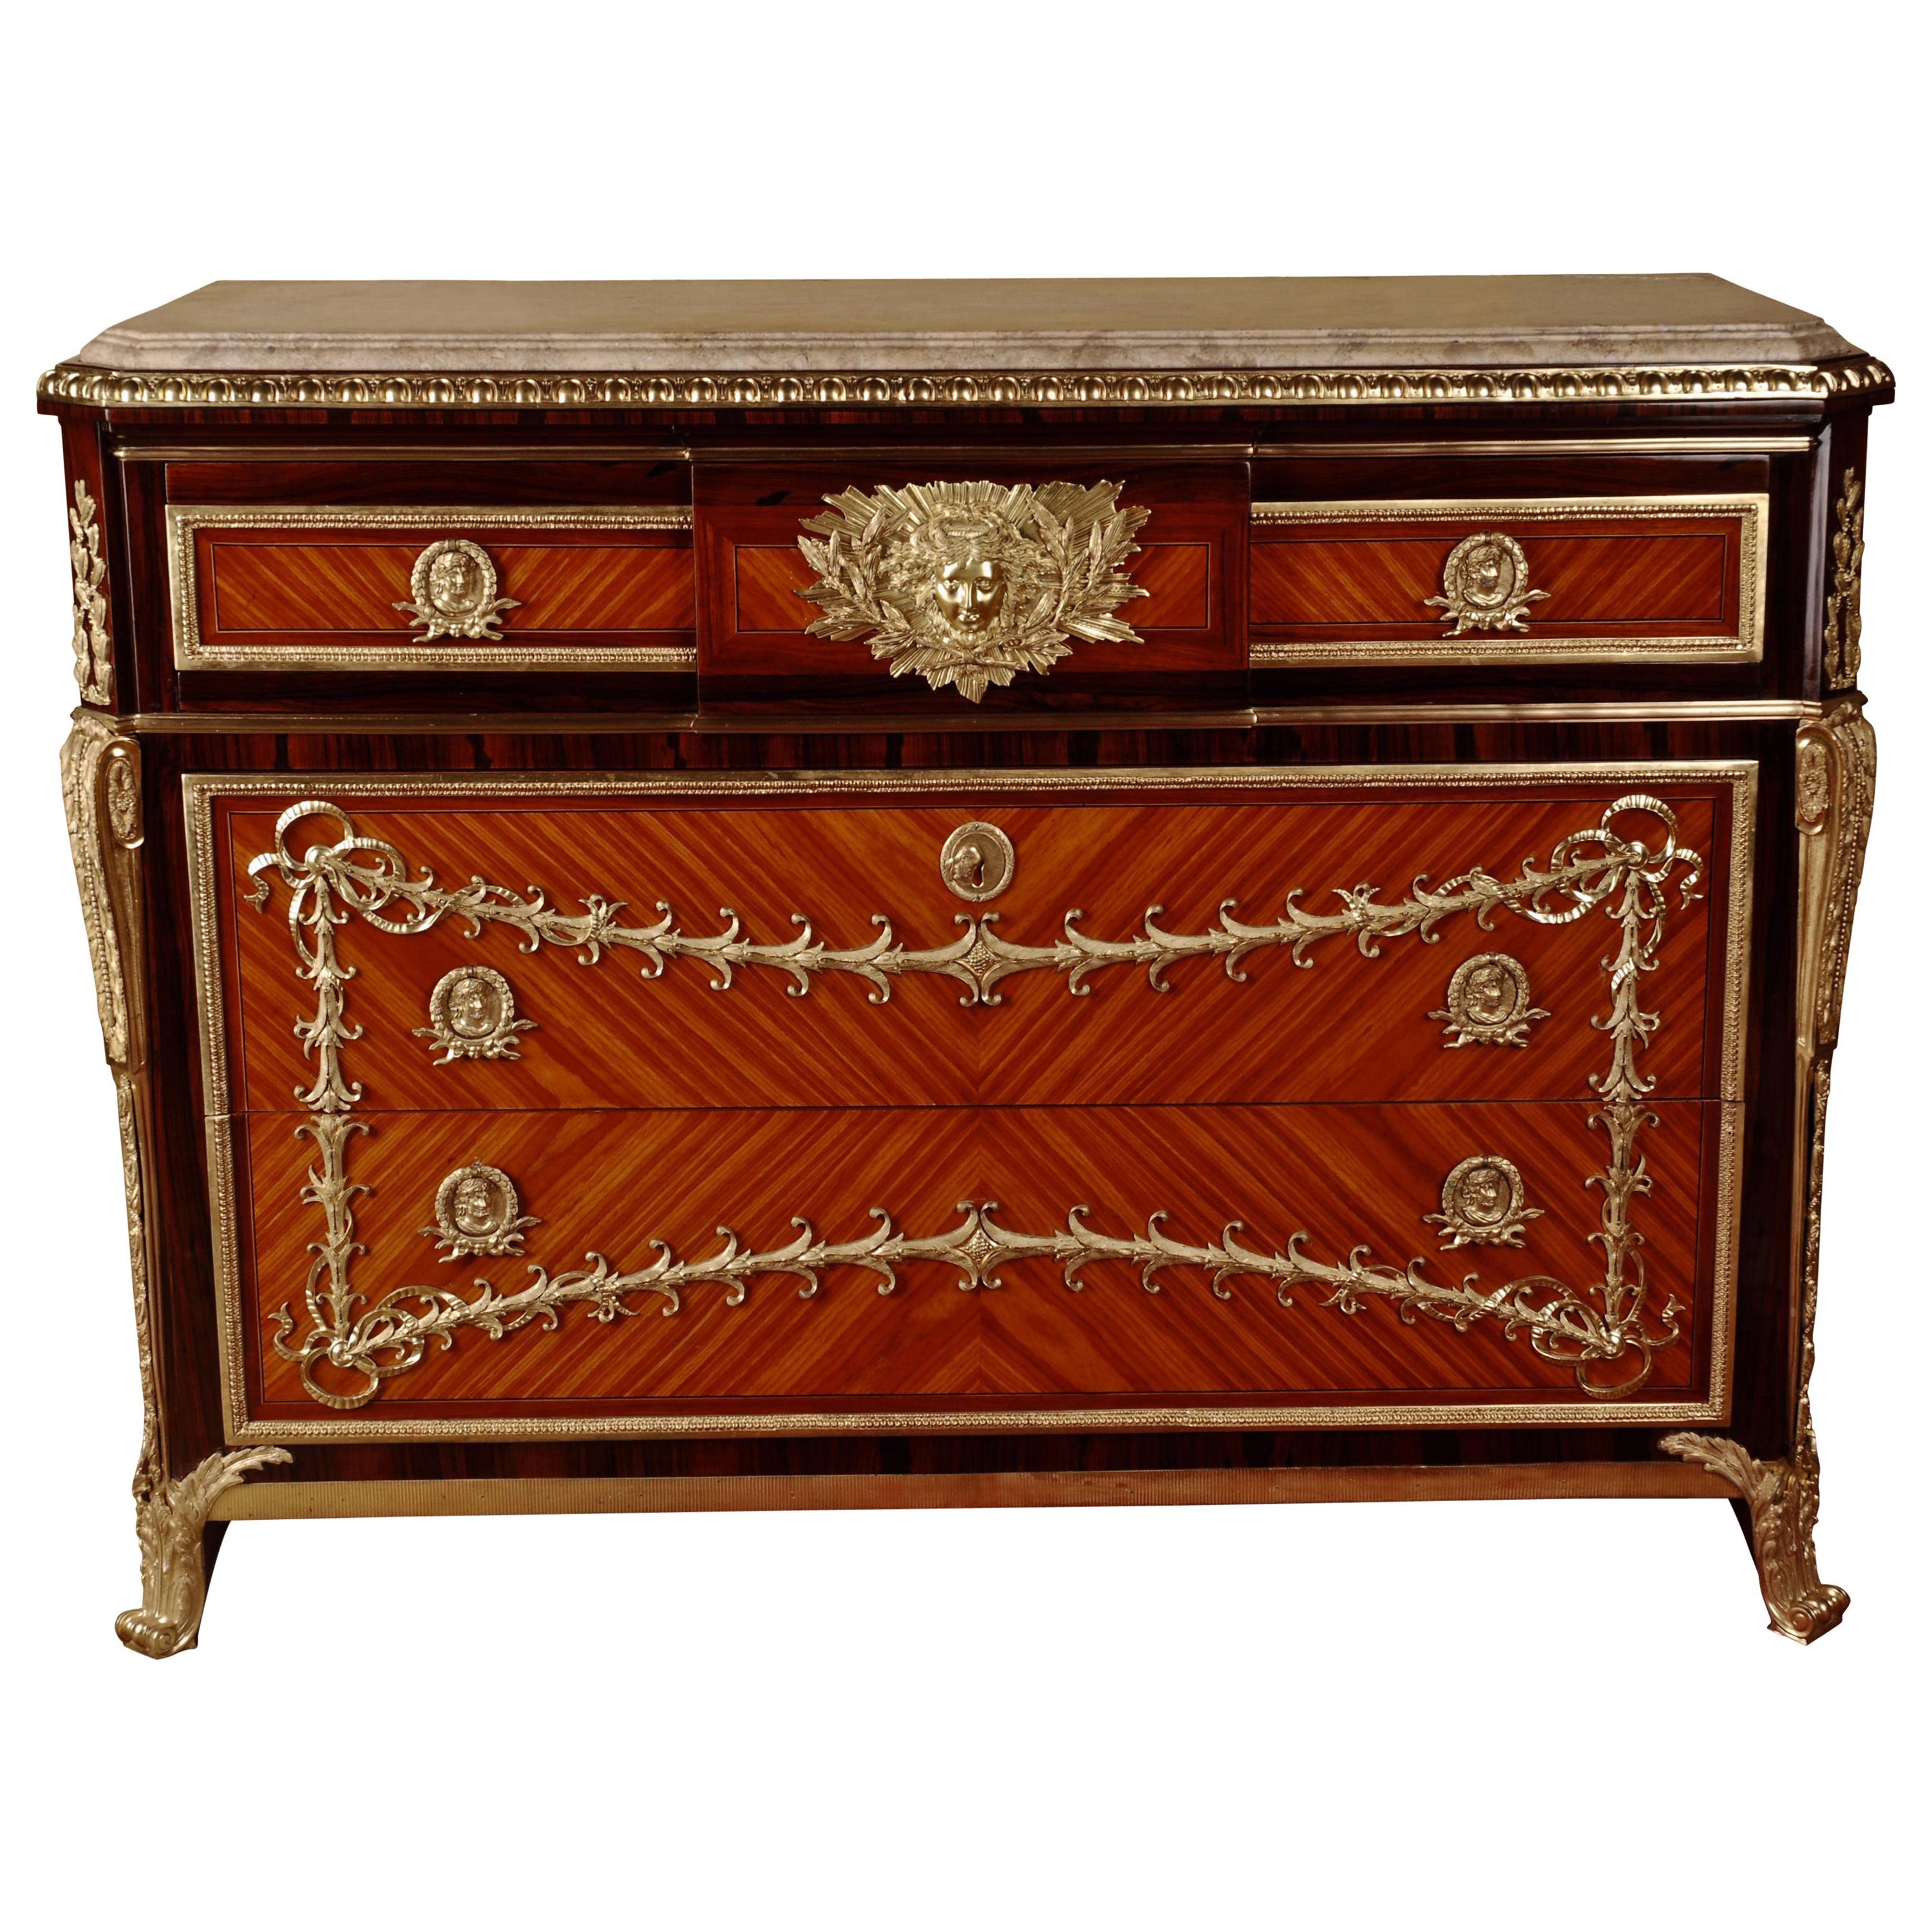 20th Century Transition Style Commode after Jean Henri Riesener